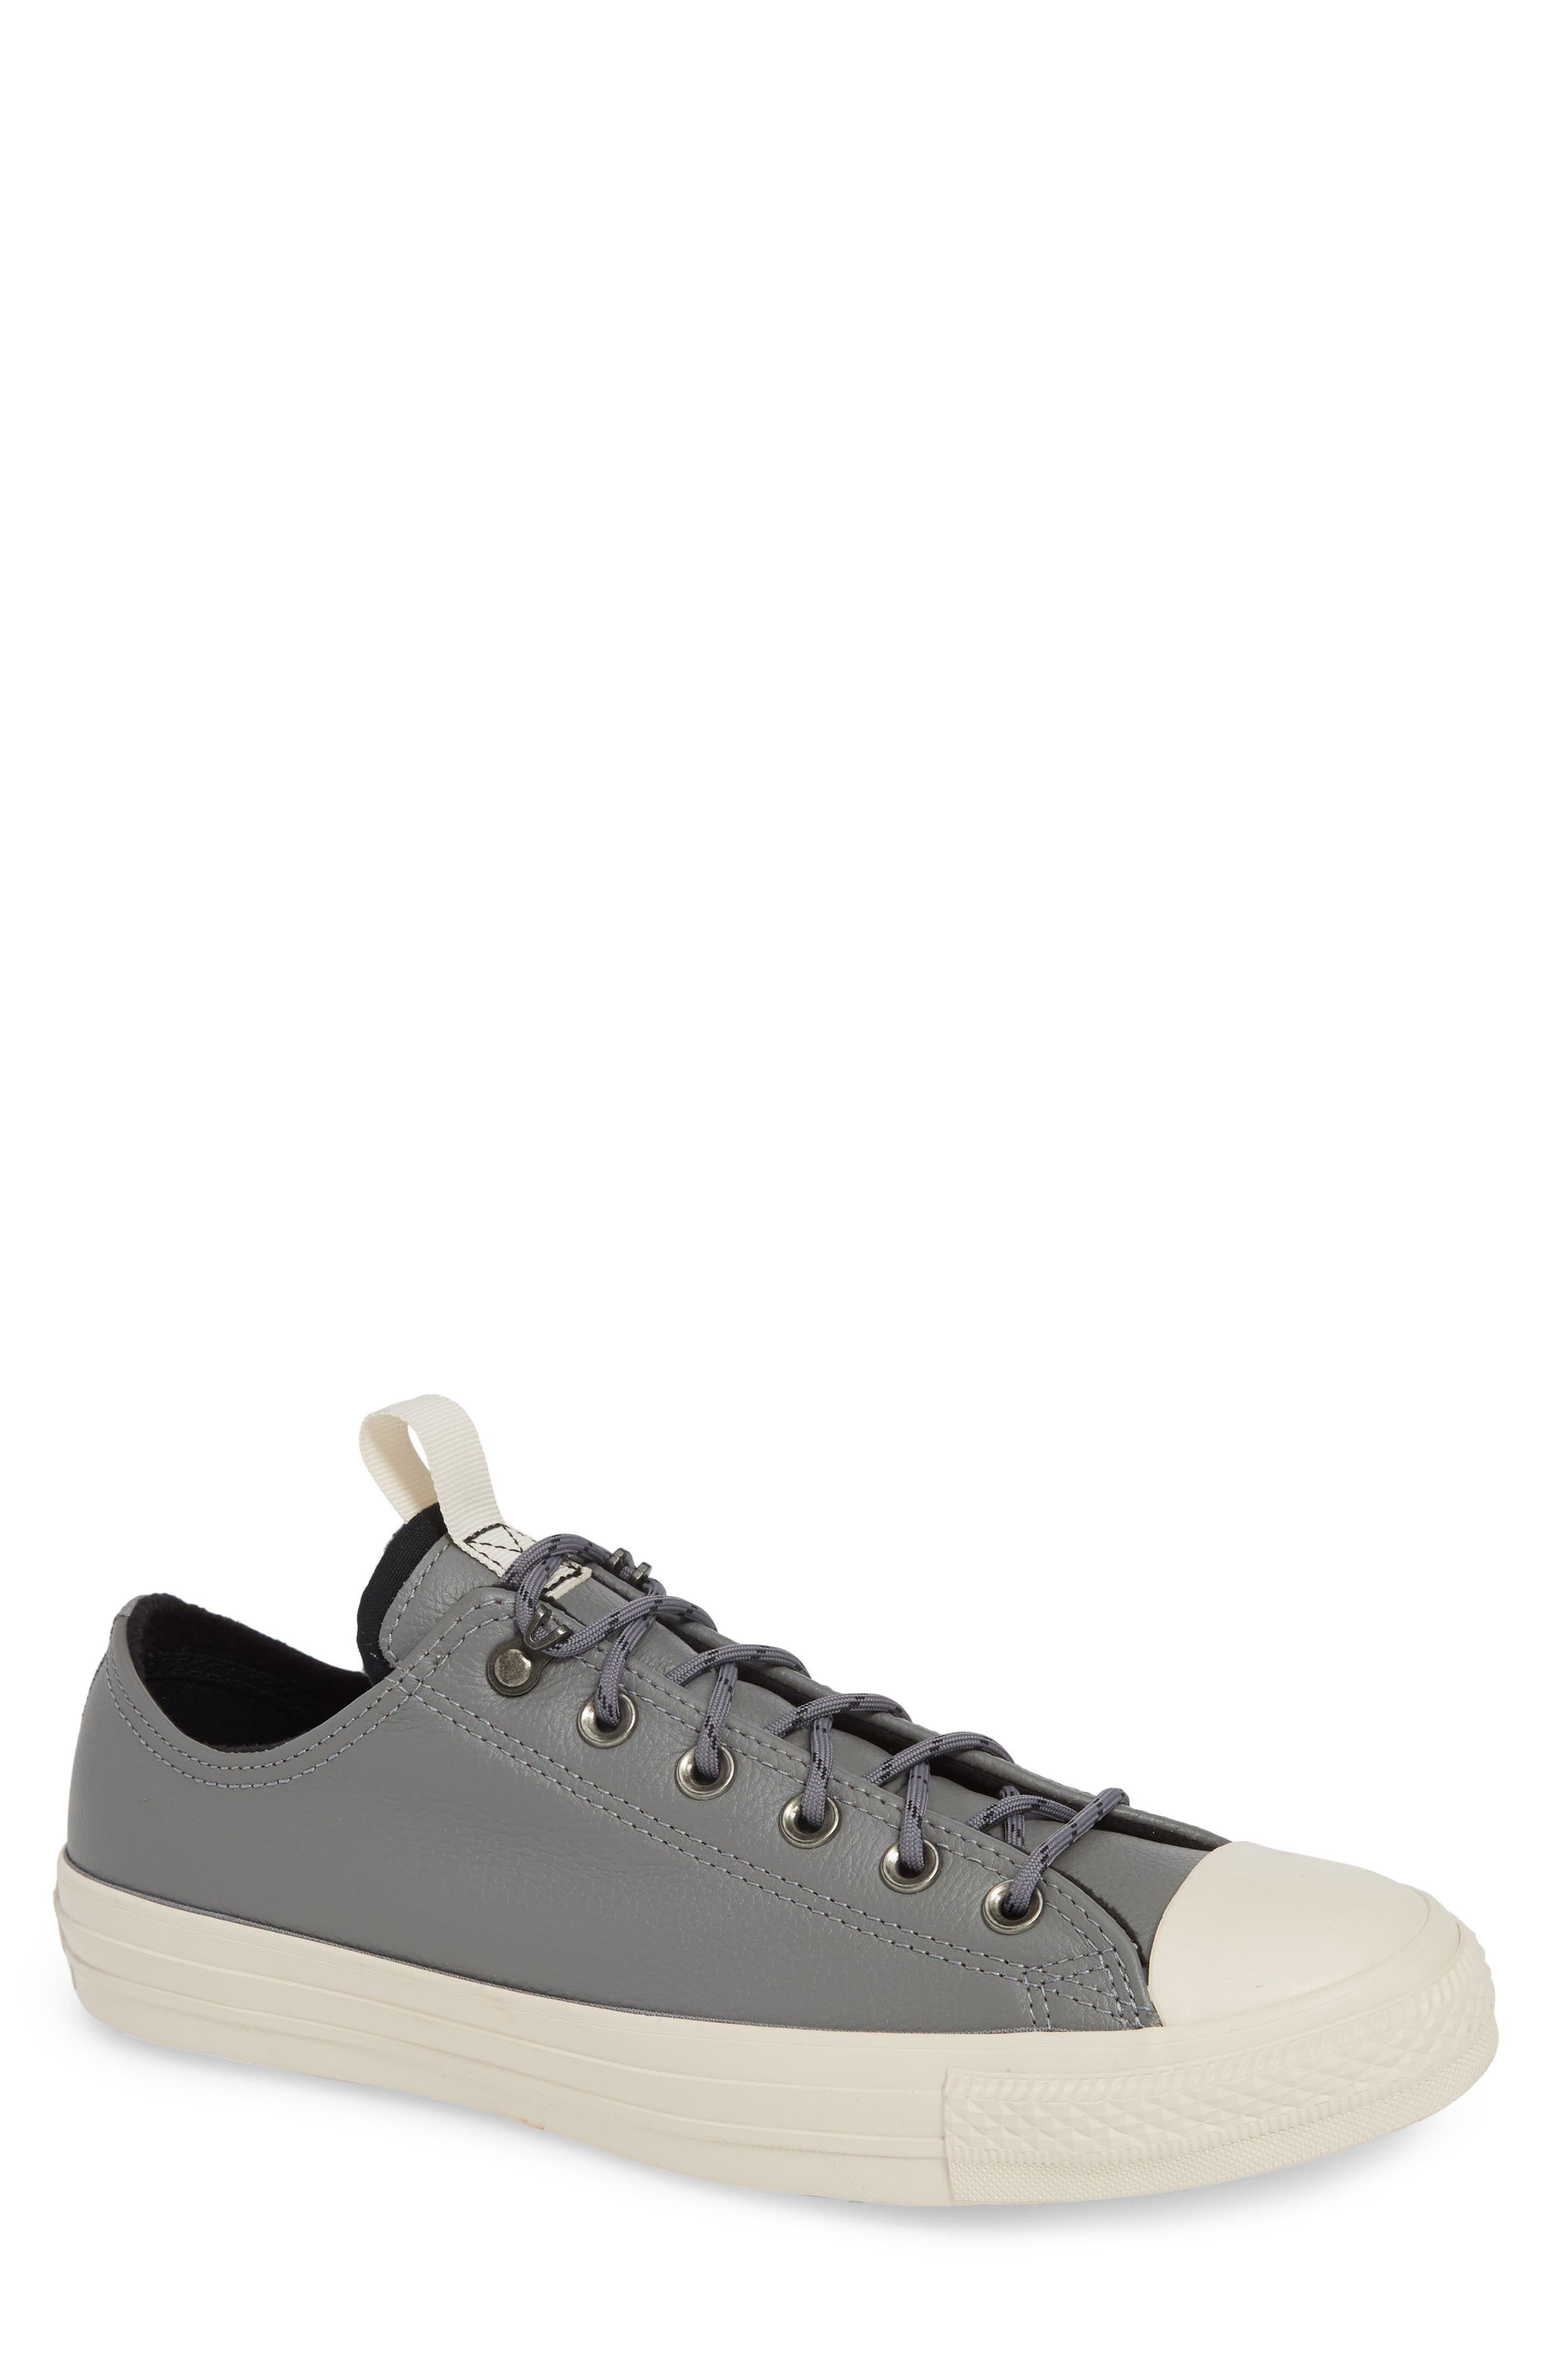 chuck taylor all star desert storm leather low top